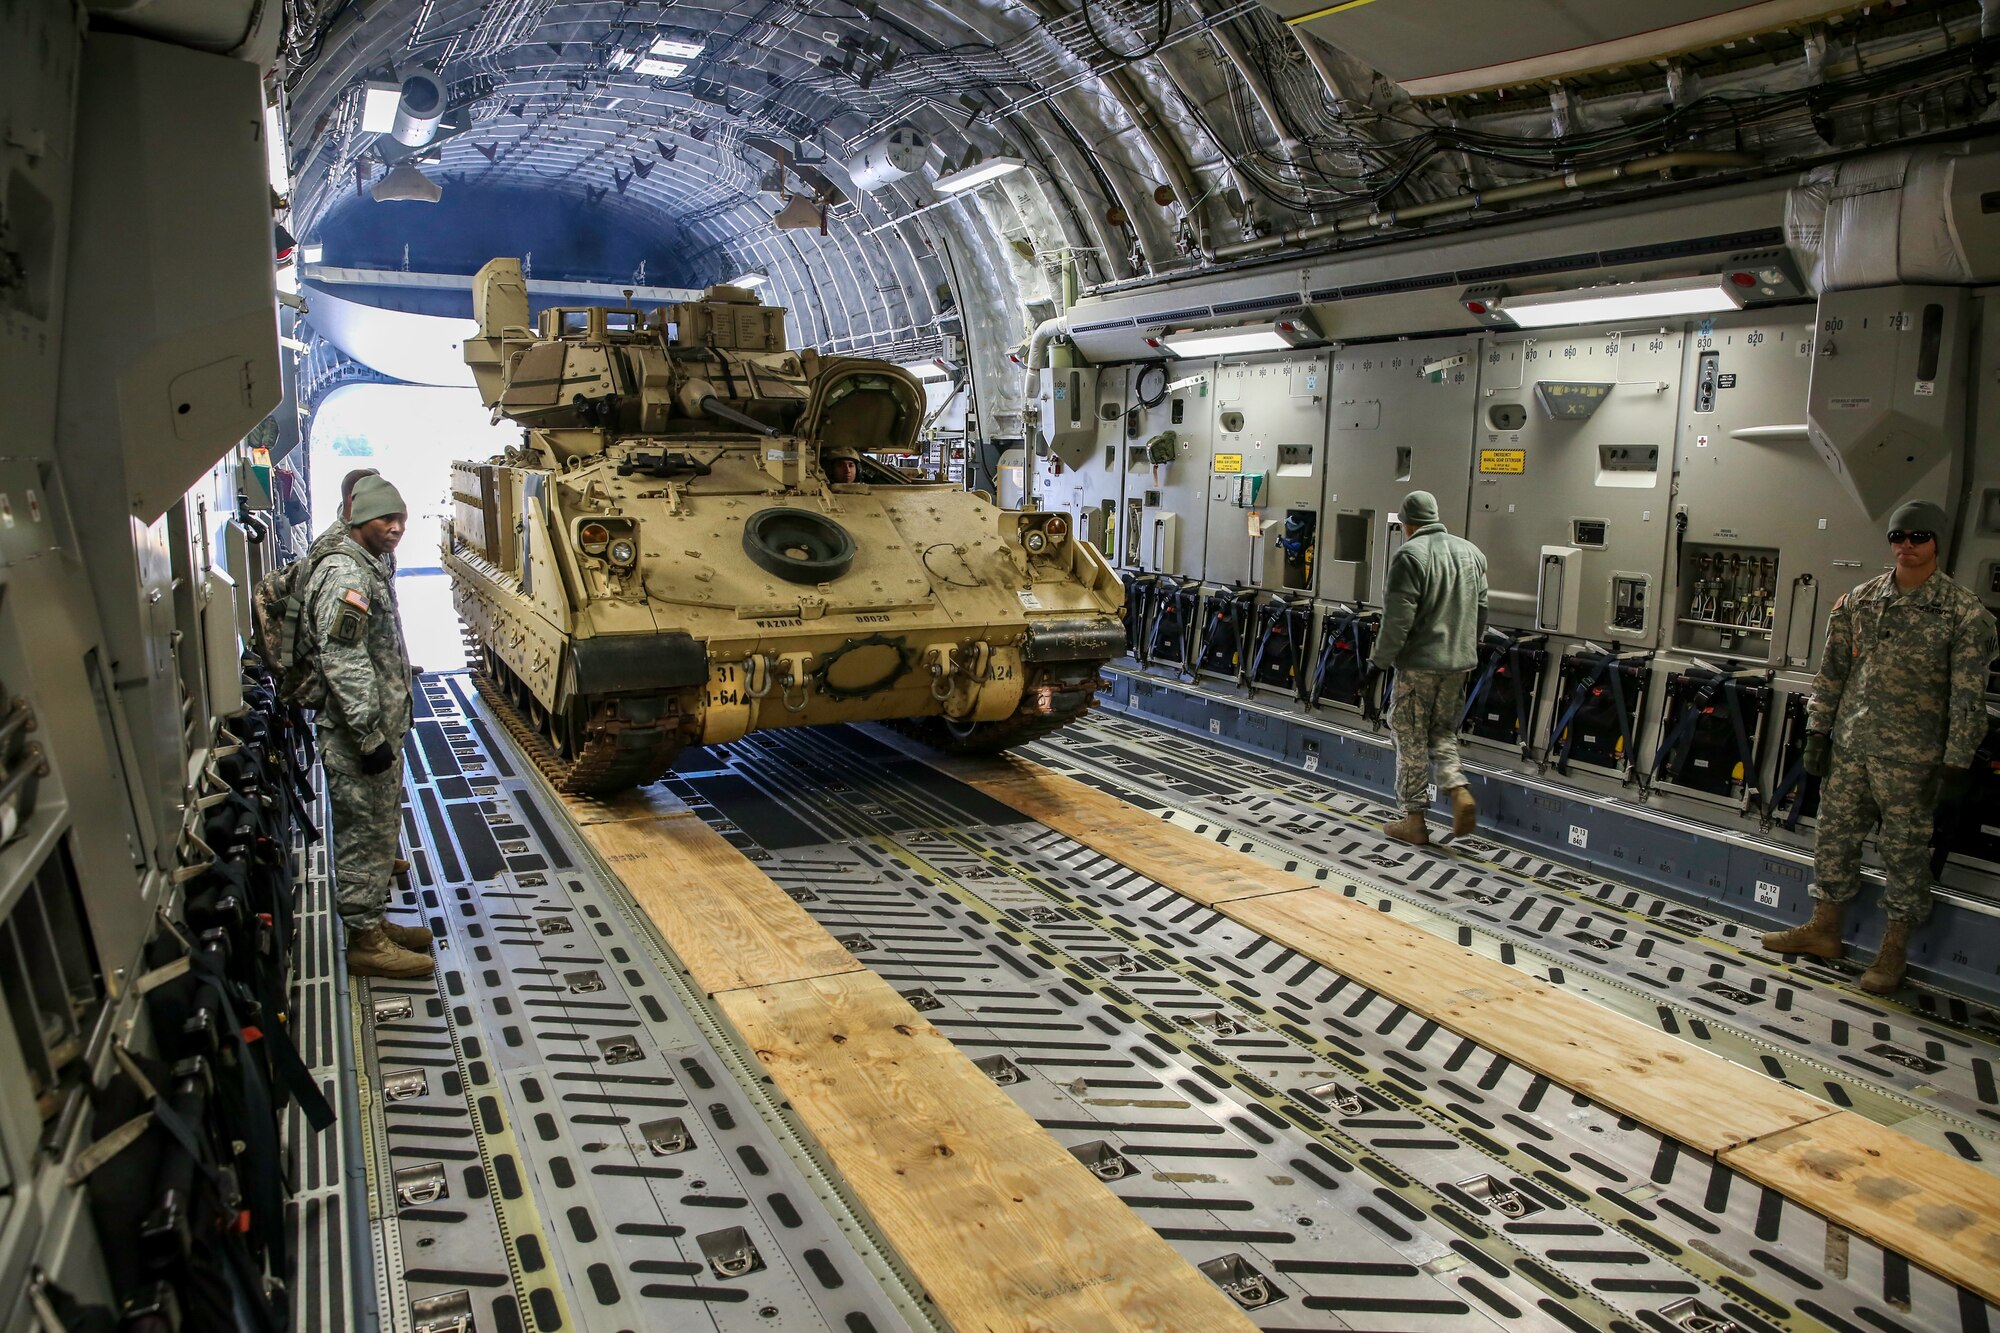 An M2A3 Bradley Fighting Vehicle makes its way down the cargo compartment of a C-17 Globemaster III Dec. 11, 2014 at Hunter Army Airfield, Ga. The vehicle was used as cargo during a two-day exercise which integrated C-17 air and ground crew training for 315th Airlift Wing Airmen stationed at Joint Base Charleston, S.C. as well as Soldiers from one of the 3rd Infantry Division’s Immediate Ready Companies stationed at Fort Stewart, Ga. Four C-17’s were used during the exercise to deploy and redeploy two Abrams M1A2 tanks, an M88 recovery vehicle and two M2A3 Bradley Fighting Vehicles. (U.S. Air Force photo by Tech. Sgt. Shane Ellis)